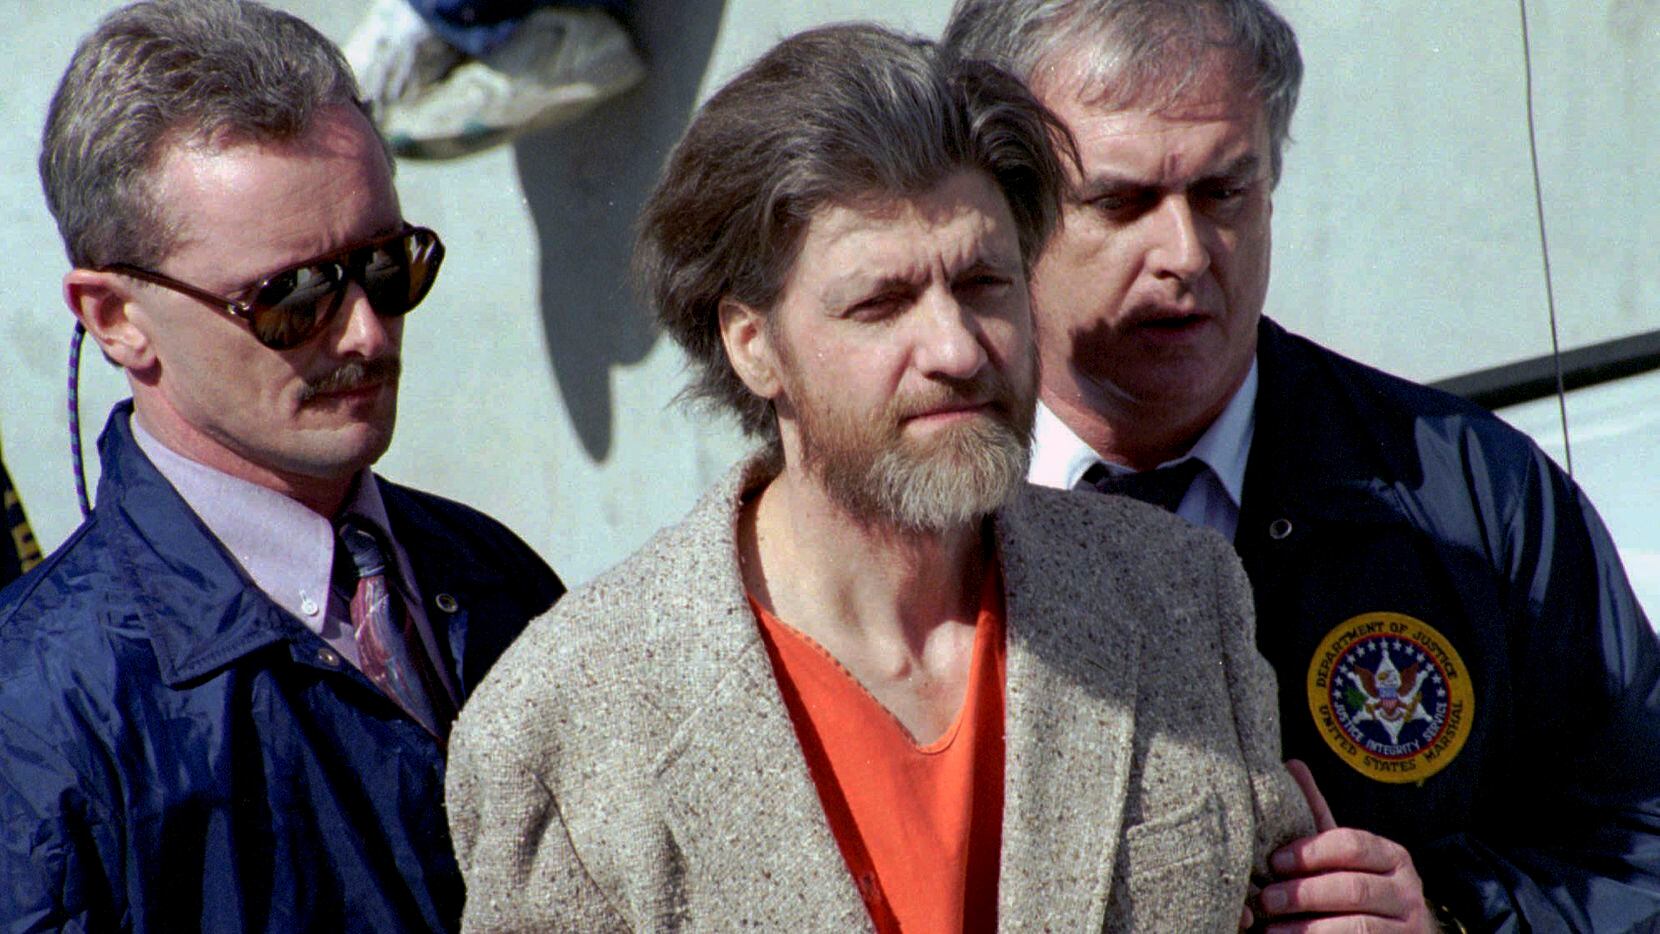 Ted Kaczynski, better known as the Unabomber, is flanked by federal agents as he is led to a...